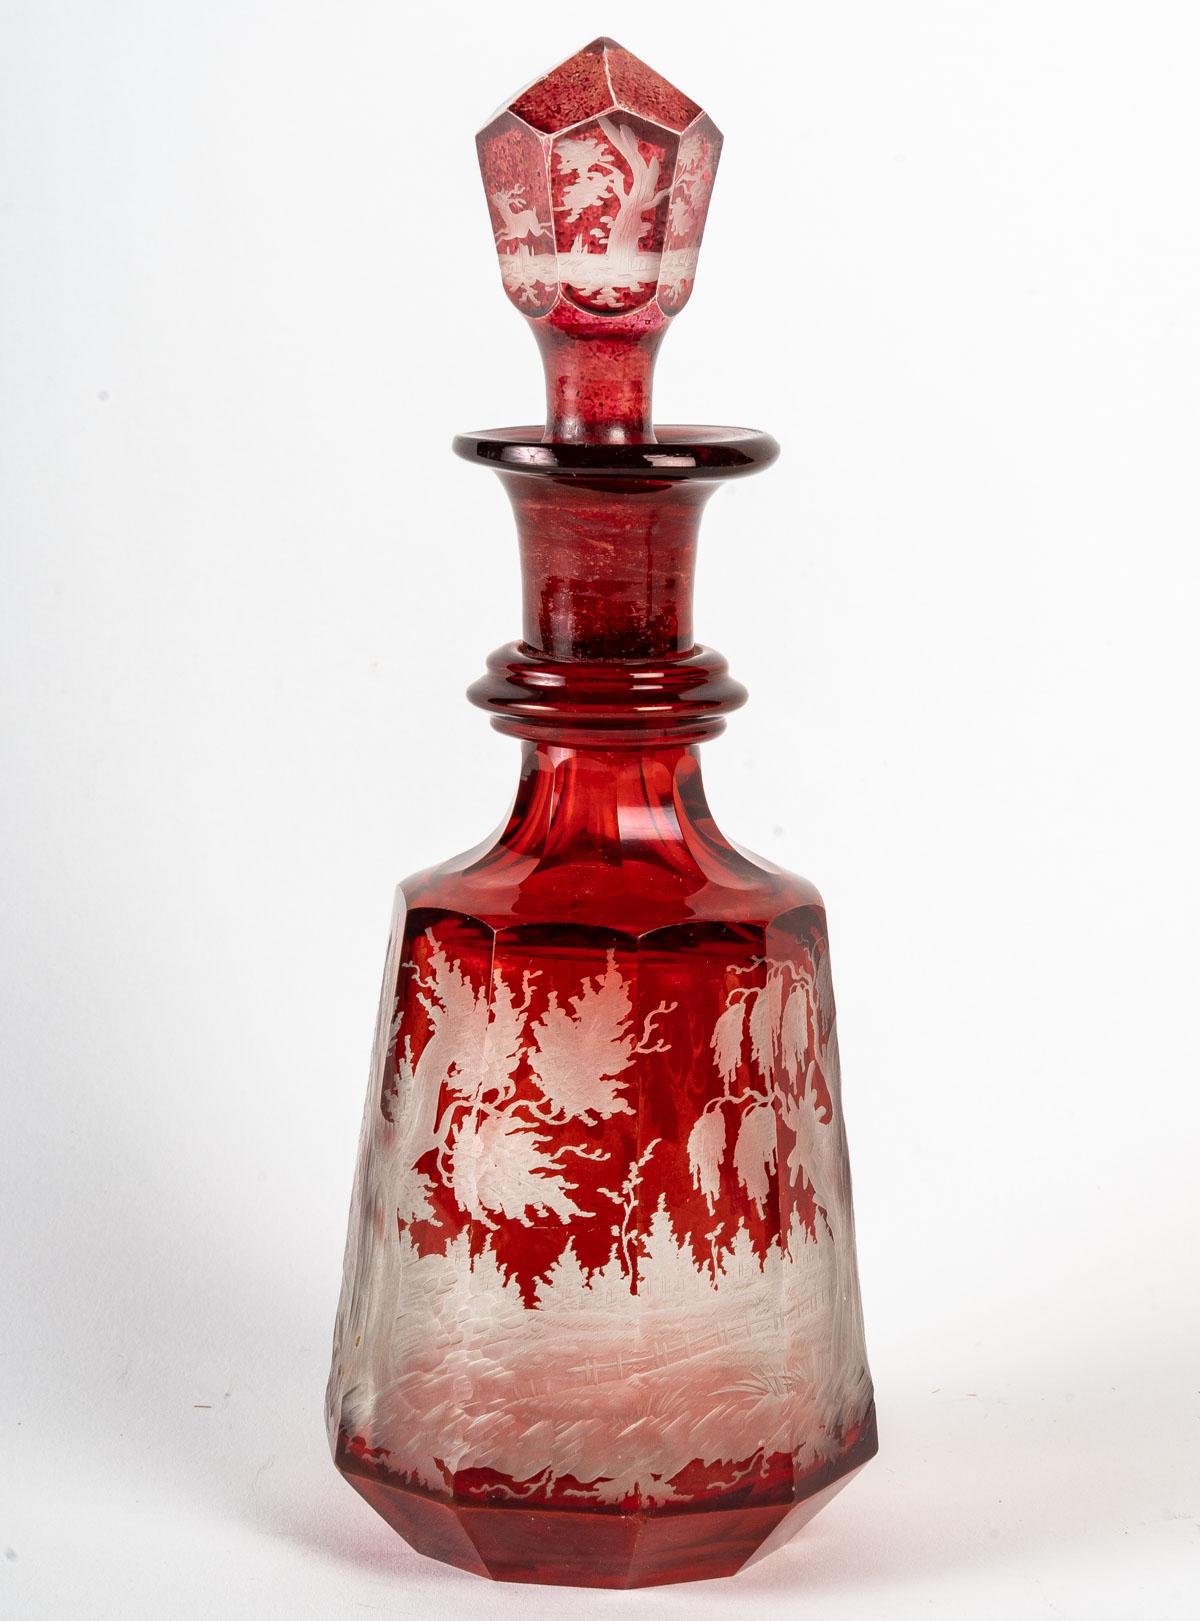 Red Bohemian crystal service set, 19th century
Bohemian crystal service set with a tray, 6 glasses and a carafe, engraved with hunting scene. 19th century.
H: 21 cm, W: 38 cm, D: 23 cm
3046.